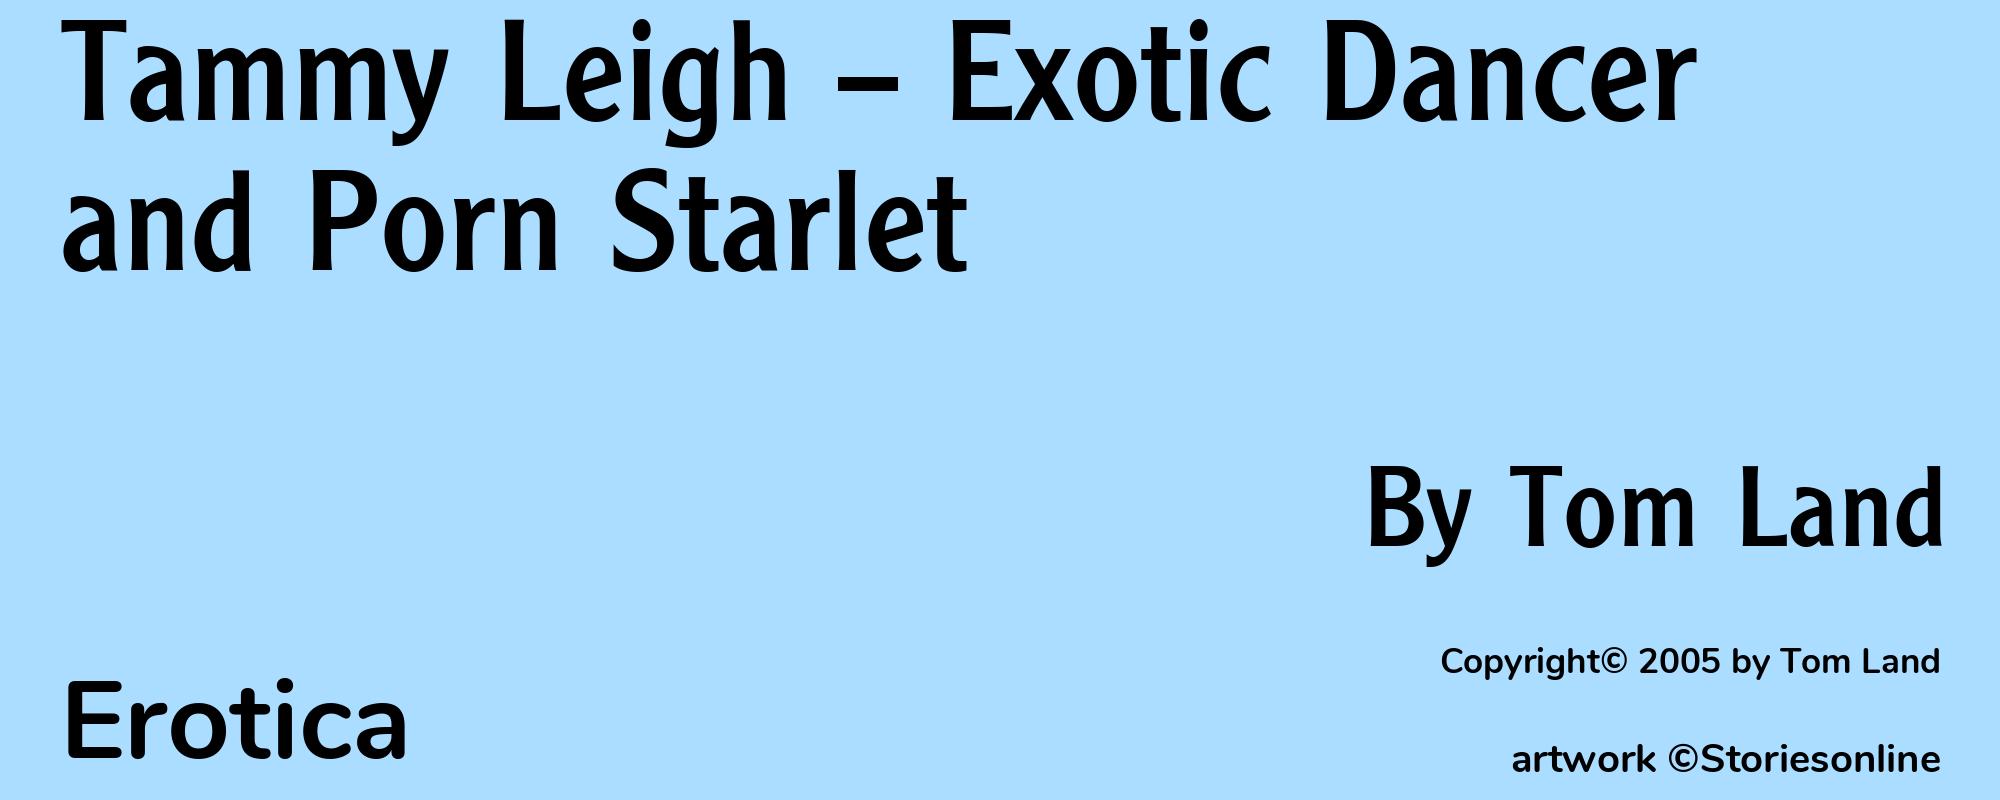 Tammy Leigh -- Exotic Dancer and Porn Starlet - Cover